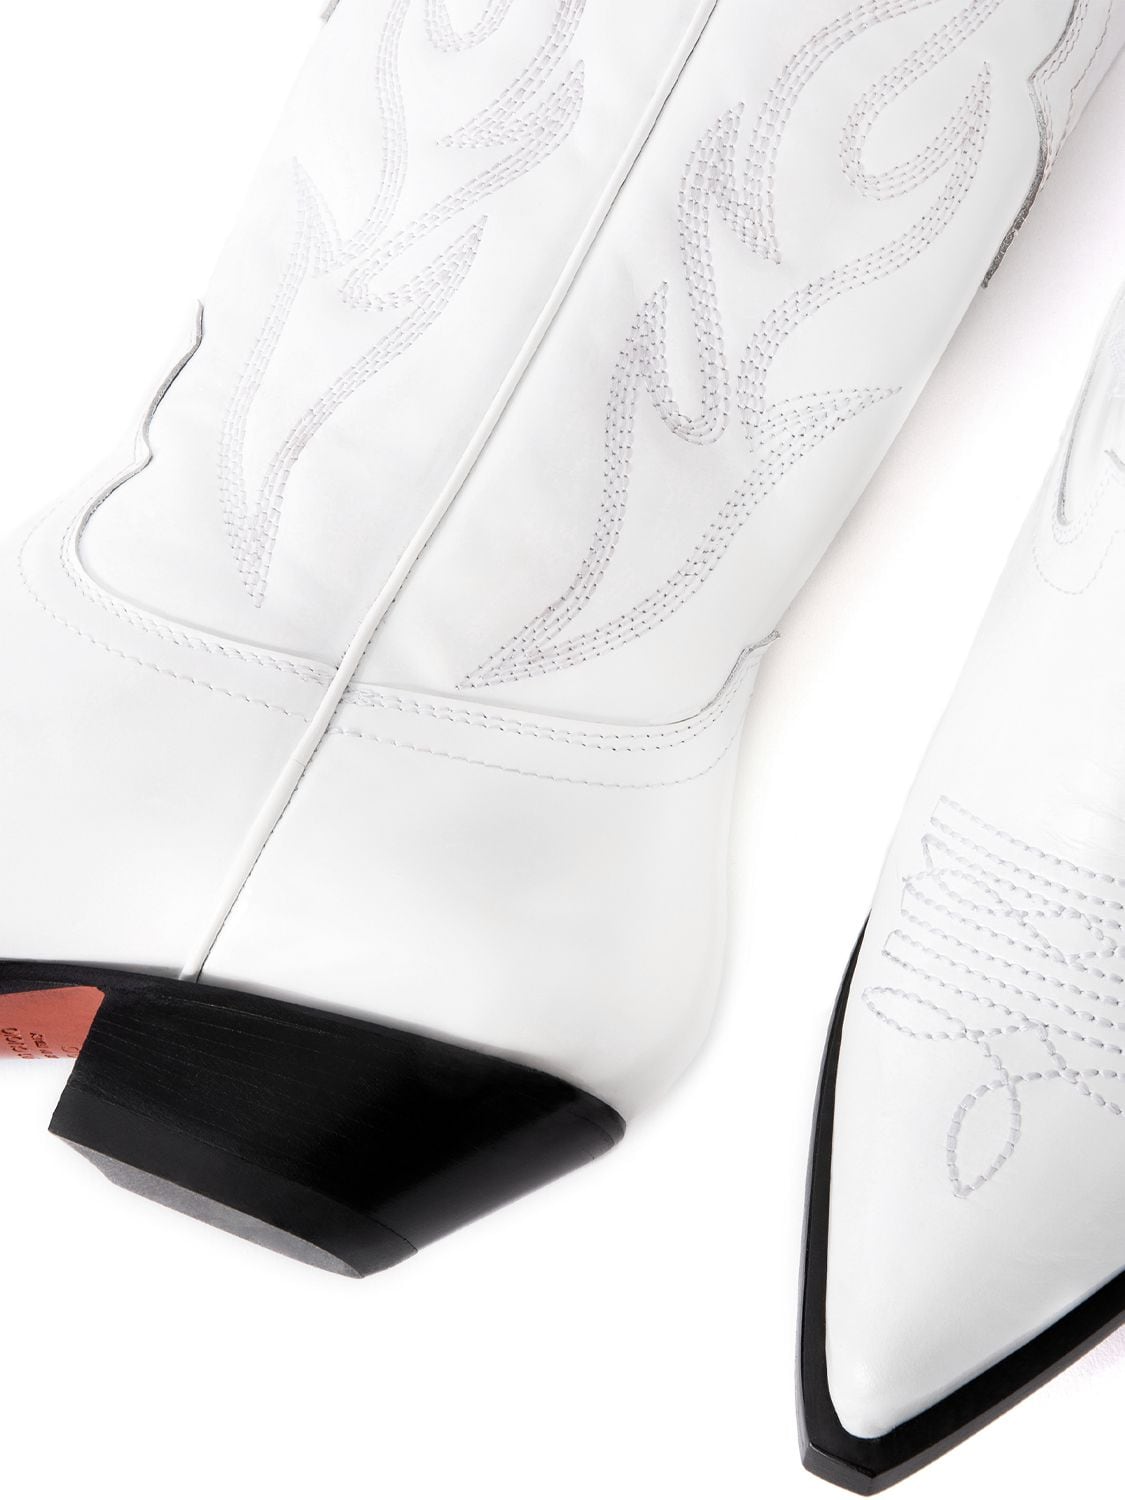 Shop Sonora 35mm Santa Fe Leather Tall Boots In White